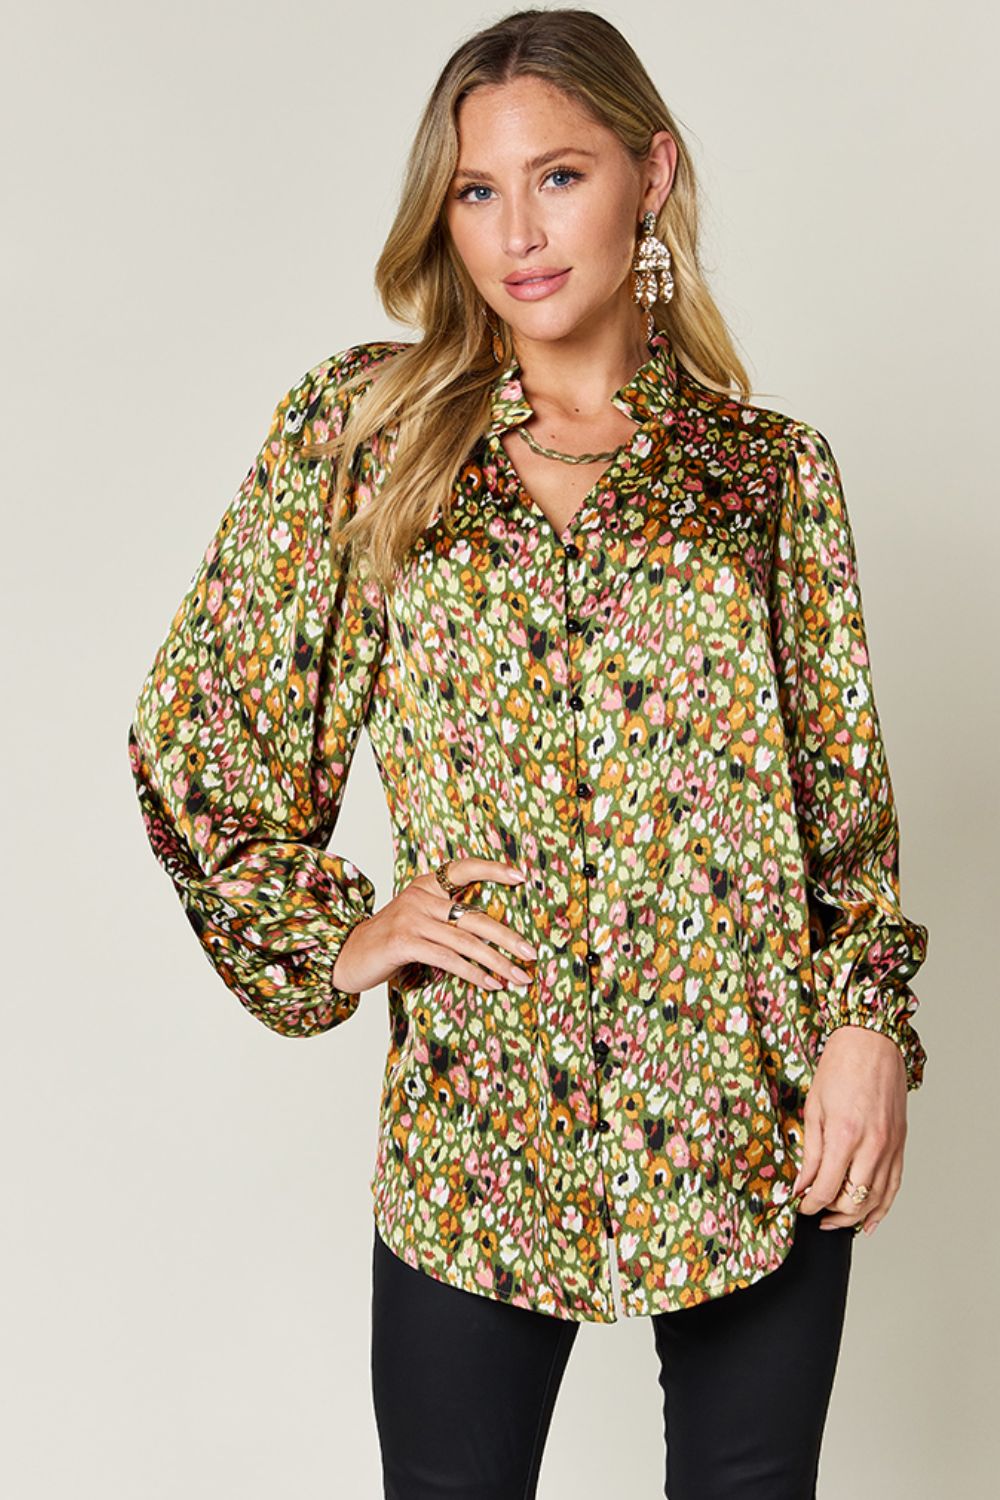 Double Take Full Size Printed Long Sleeve Blouse (3 Colors)